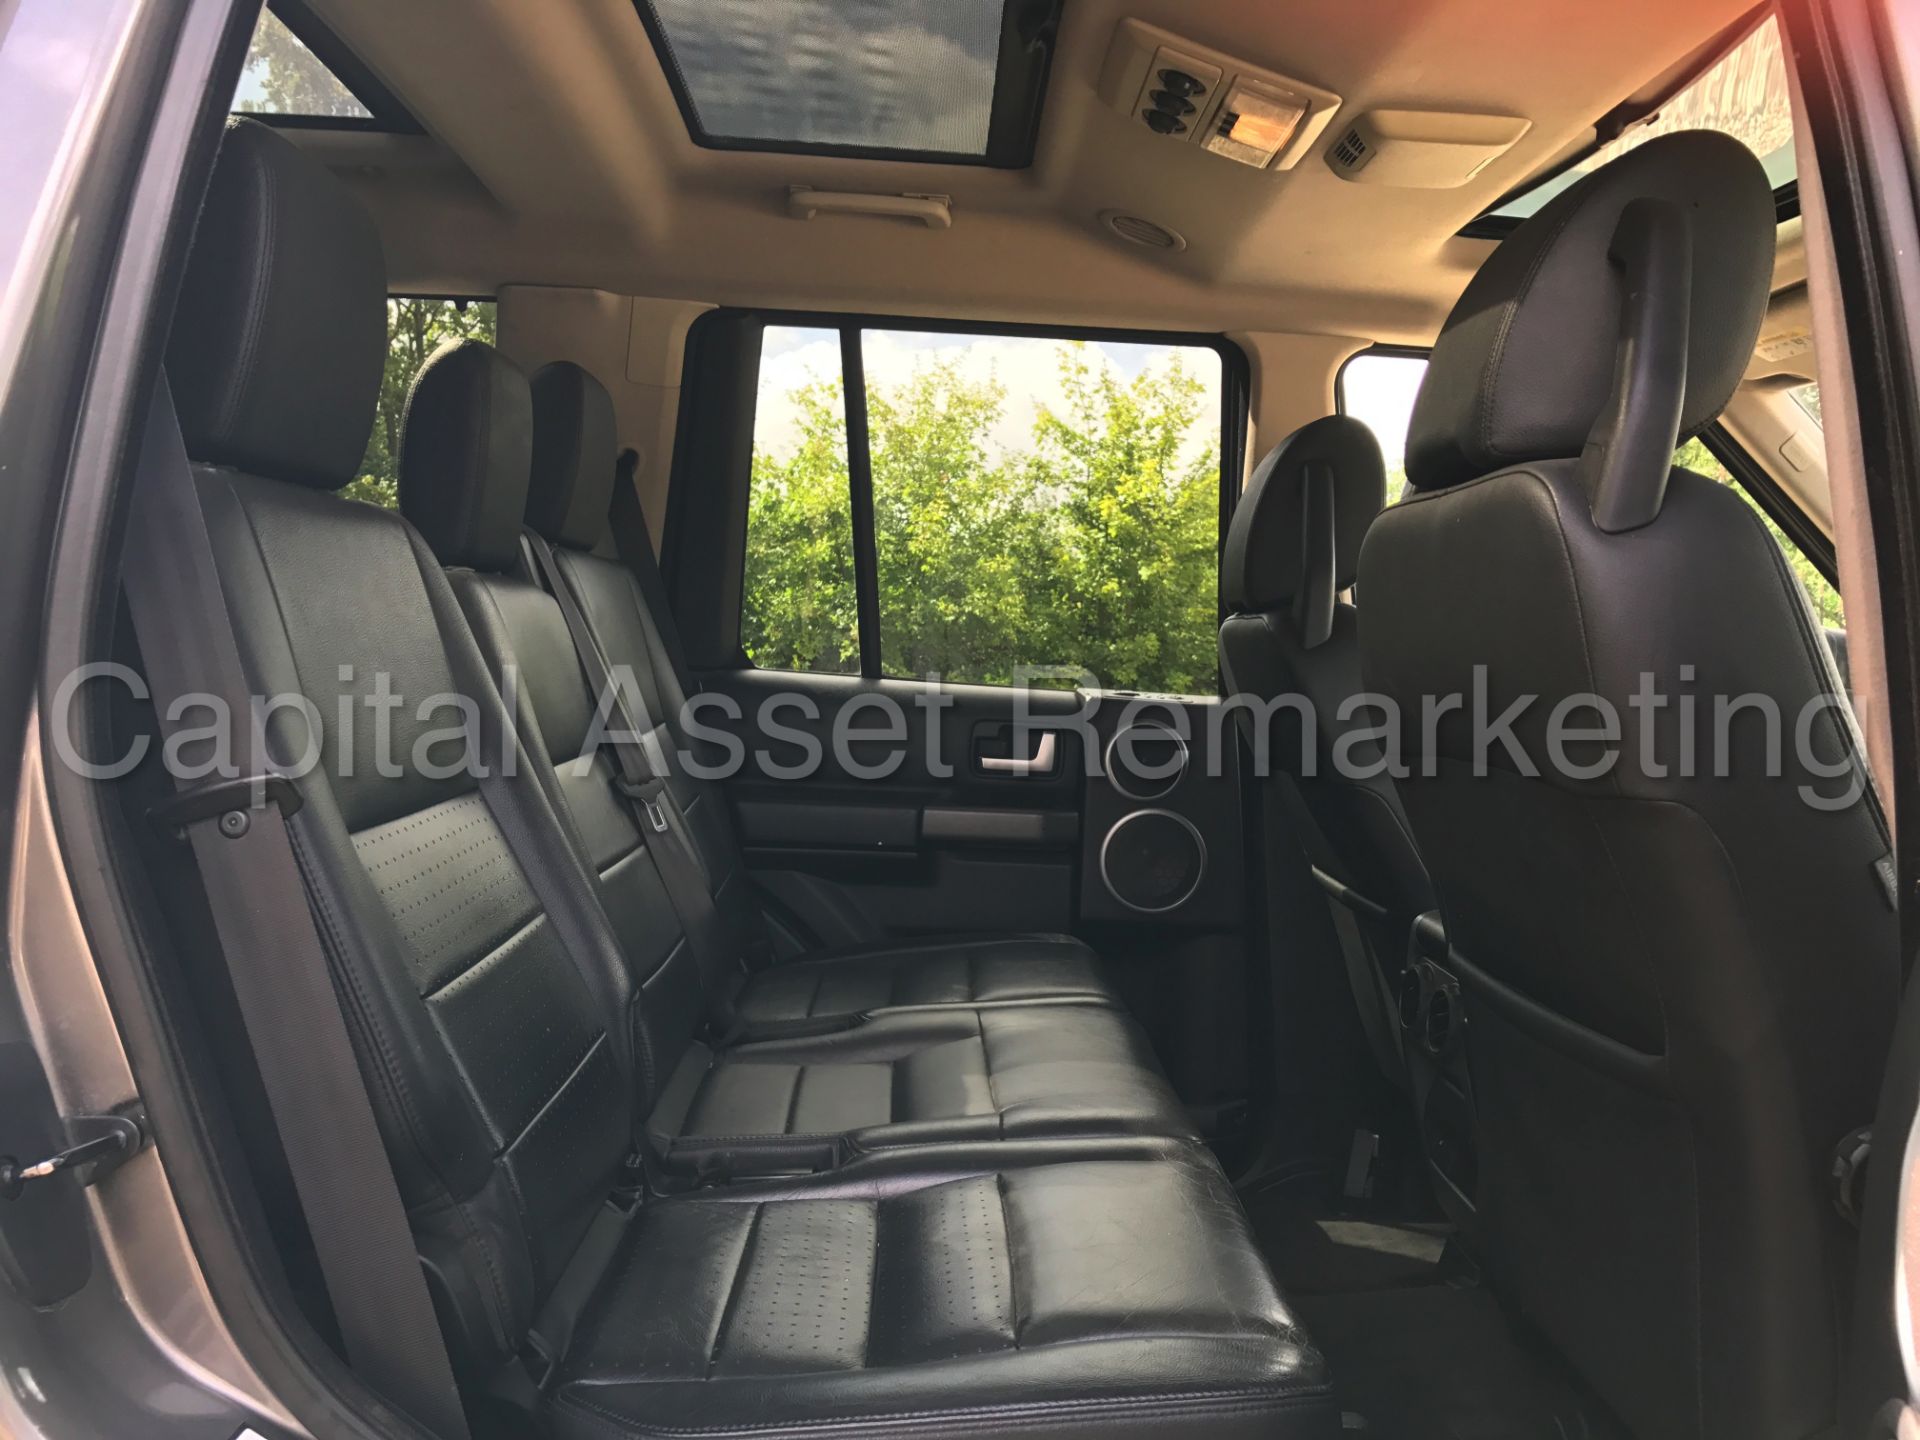 LAND ROVER DISCOVERY 3 'HSE' (2007) 'TDV6 - AUTO - LEATHER - SAT NAV - 7 SEATER' **MASSIVE SPEC** - Image 19 of 34